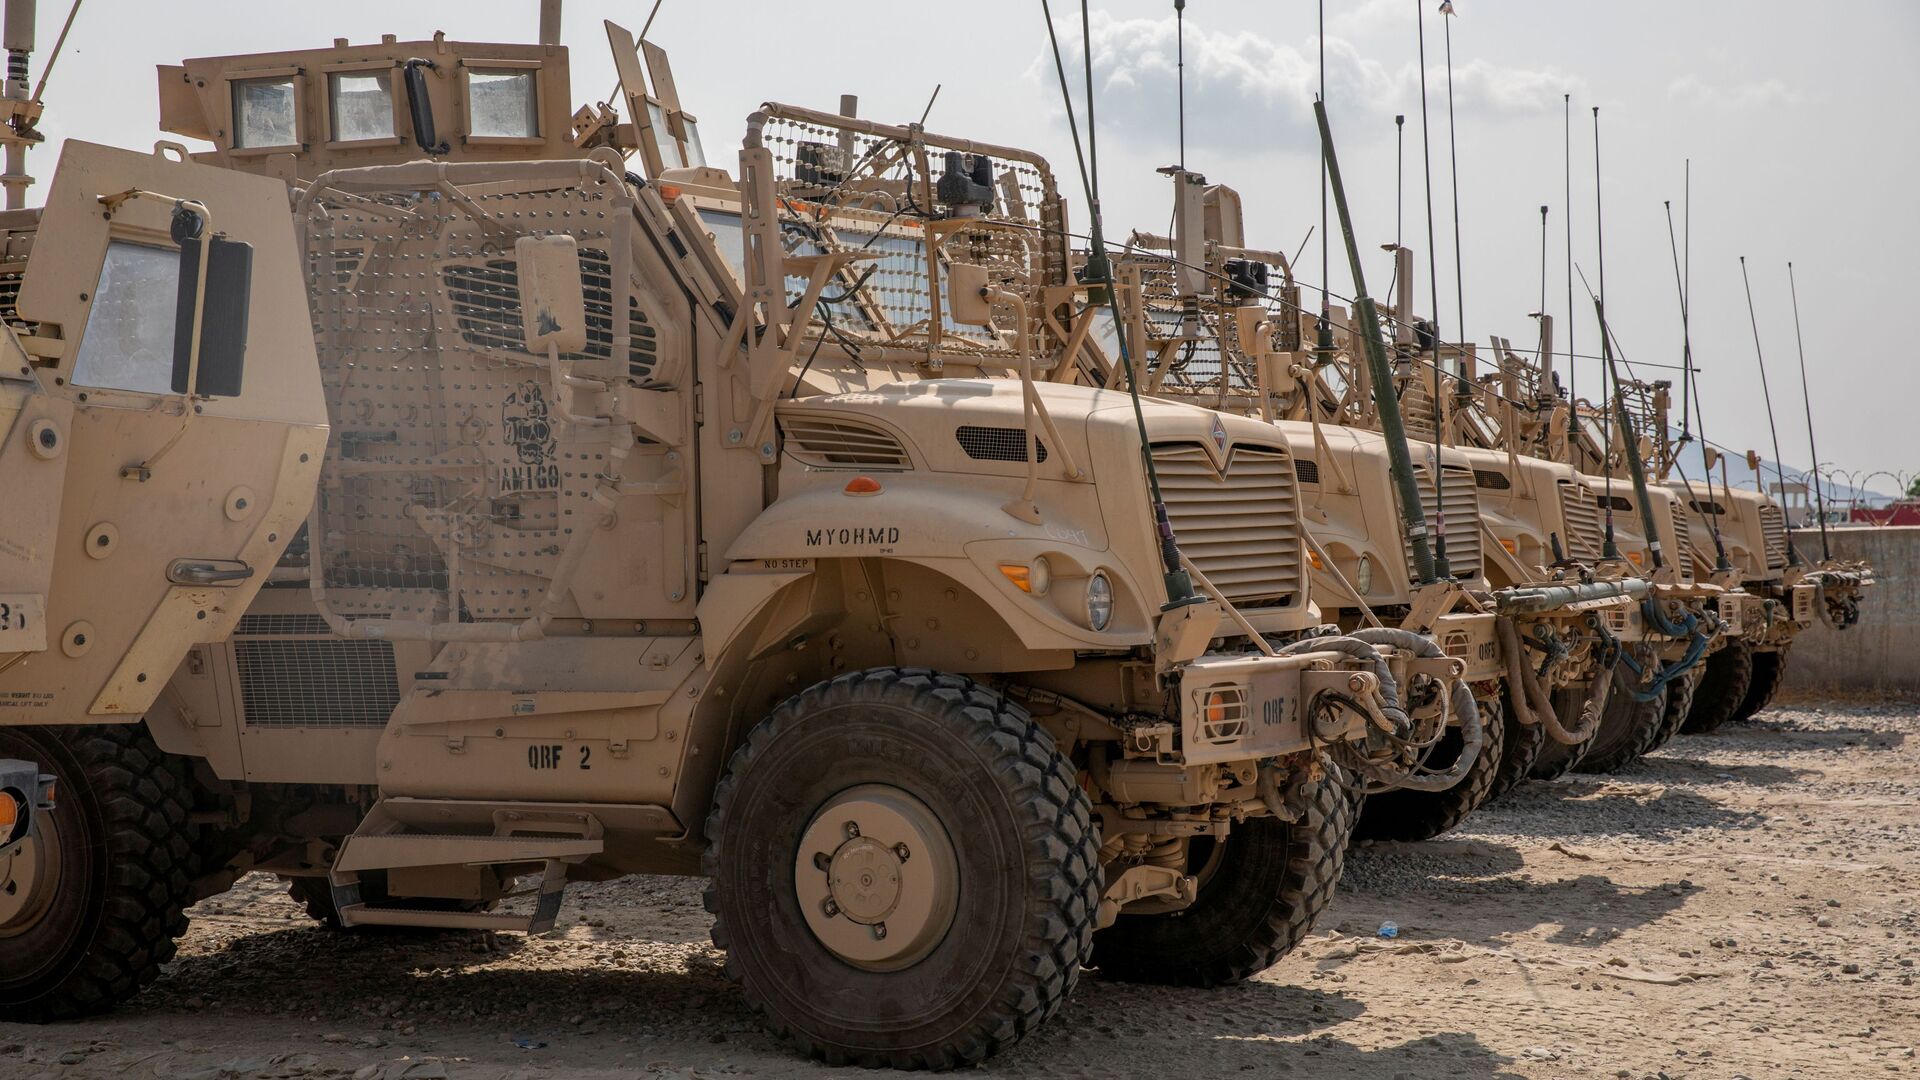 U.S. Army soldiers from the 10th Mountain Division and U.S. contractors prepare Mine Resistant Ambush Protected vehicles, MRAPs, to be transported off of base in support of the withdrawal mission in Kandahar, Afghanistan, August 21, 2020. Picture taken August 21, 2020. U.S. Army/Sgt. Jeffery J. Harris - Sputnik International, 1920, 09.09.2021